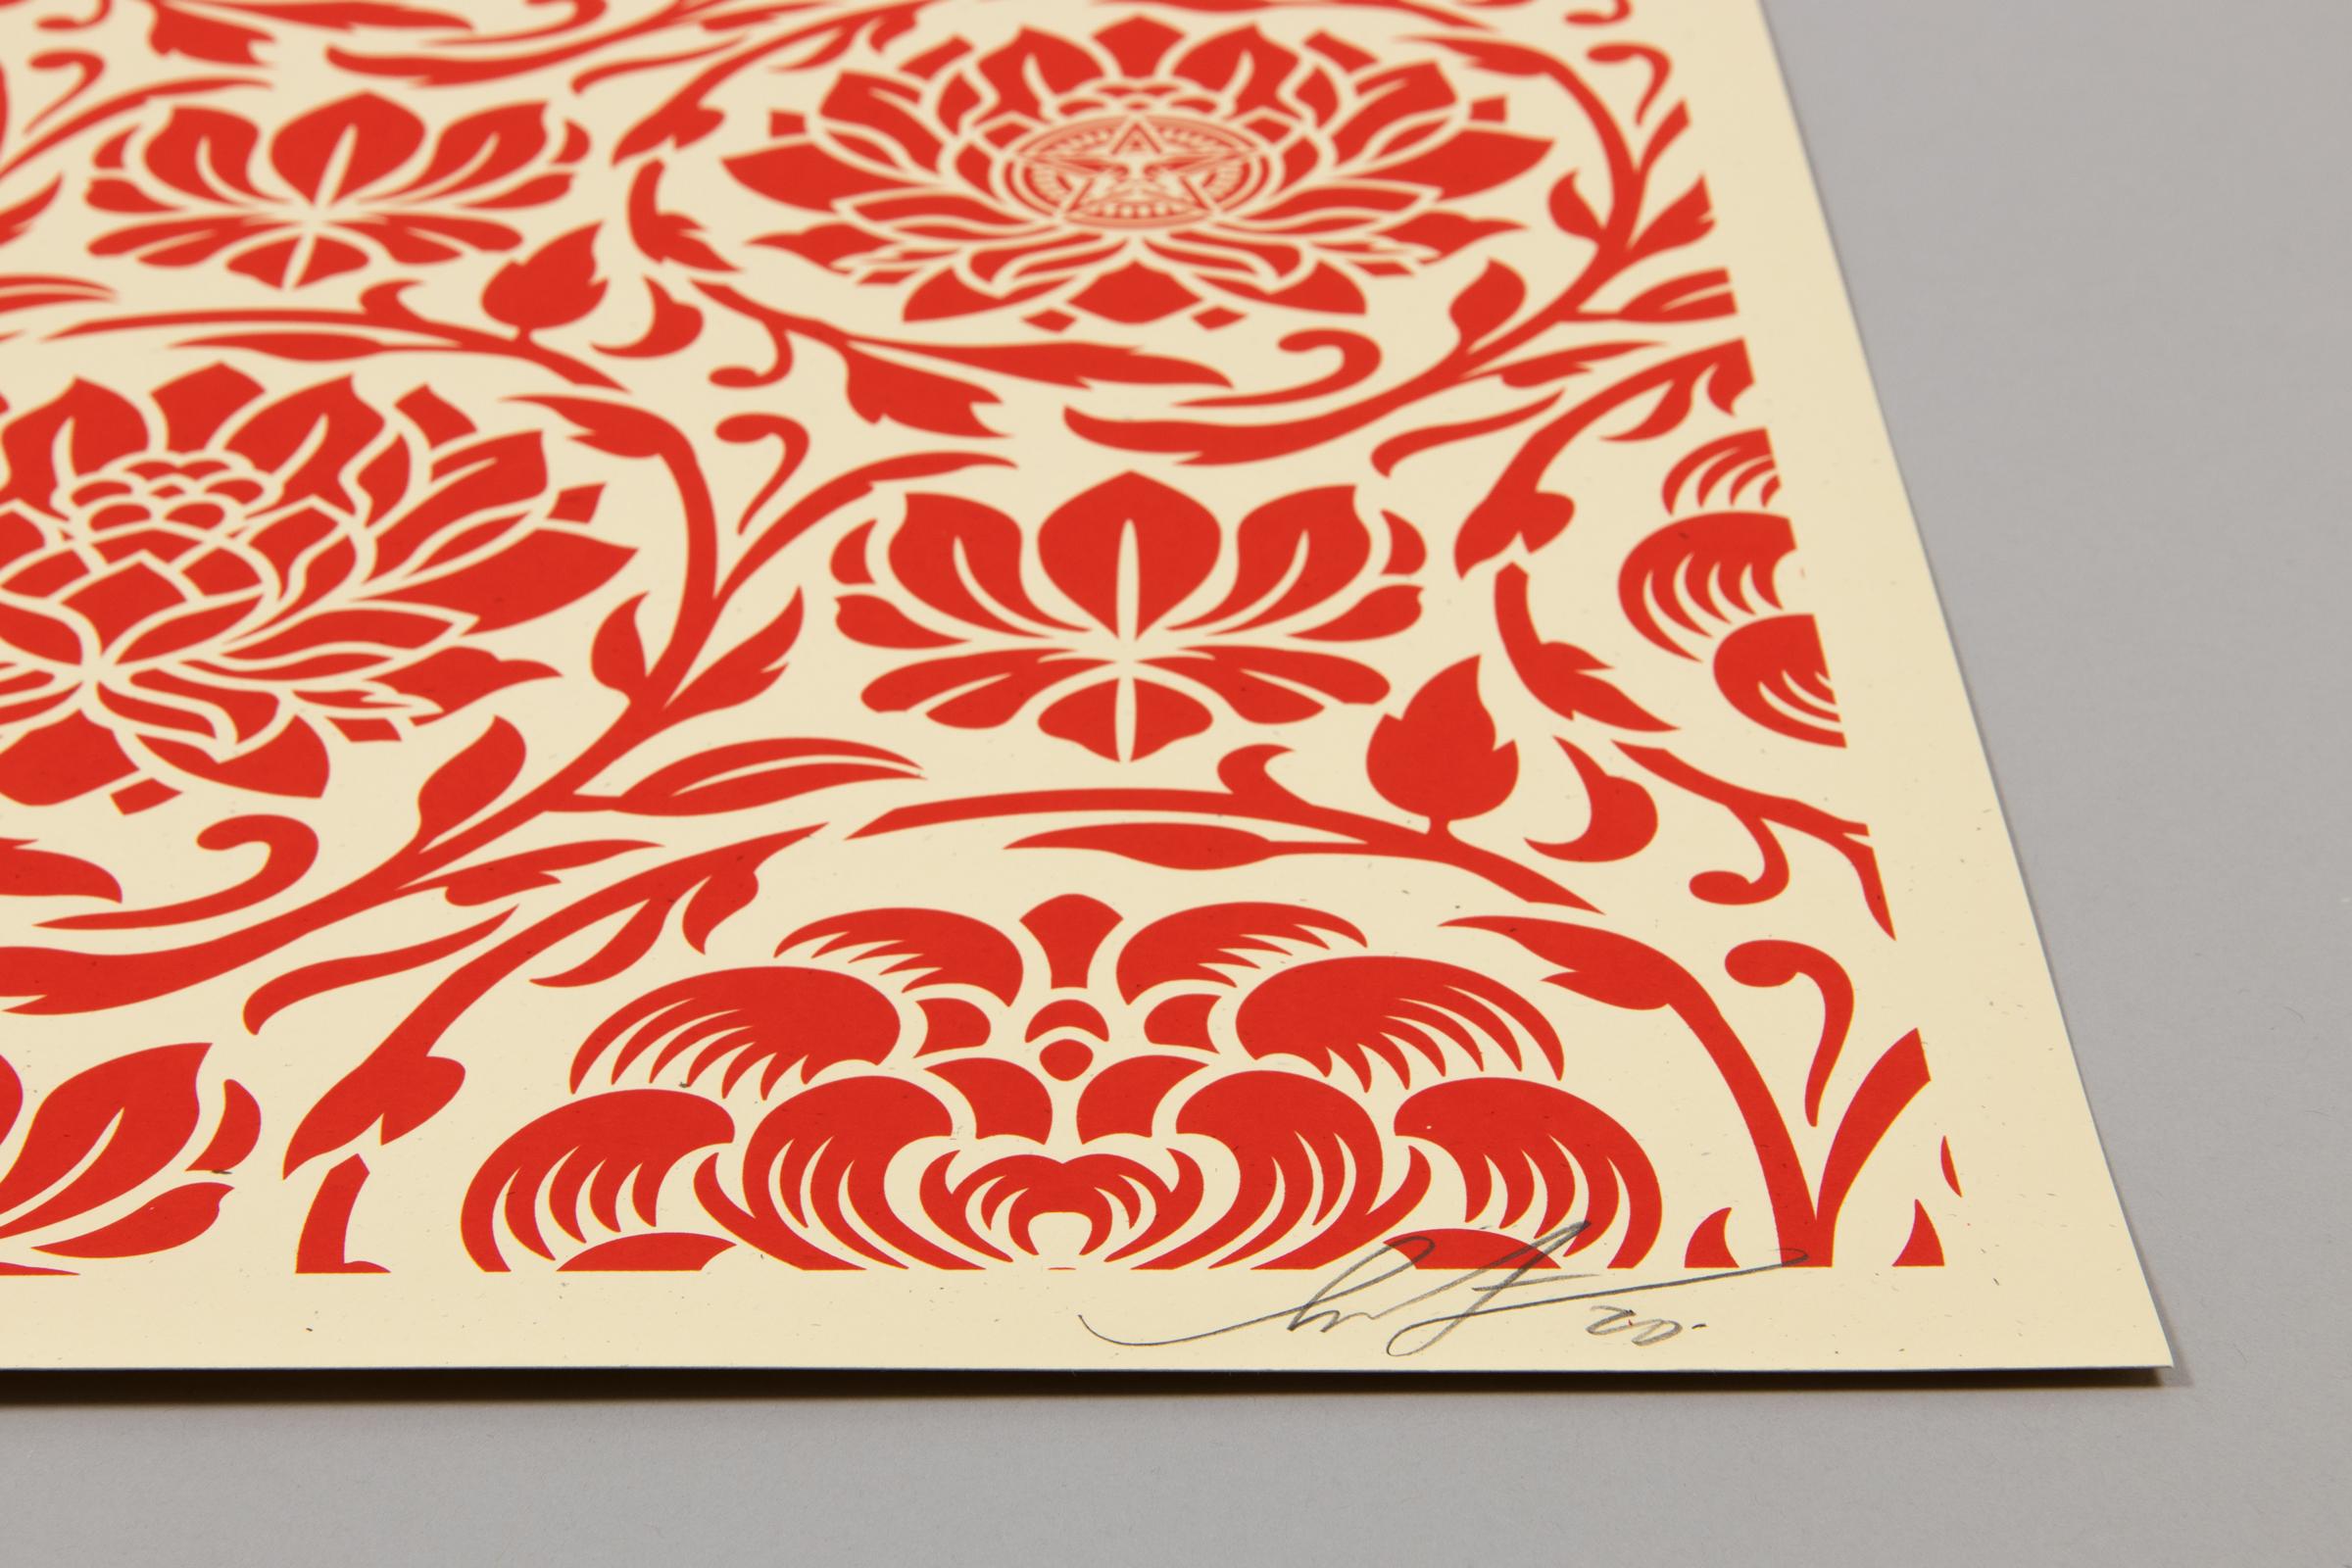 Shepard Fairey, Floral Harmony (Red Yin/Yang) - 2 Signed Prints, Street Art  4